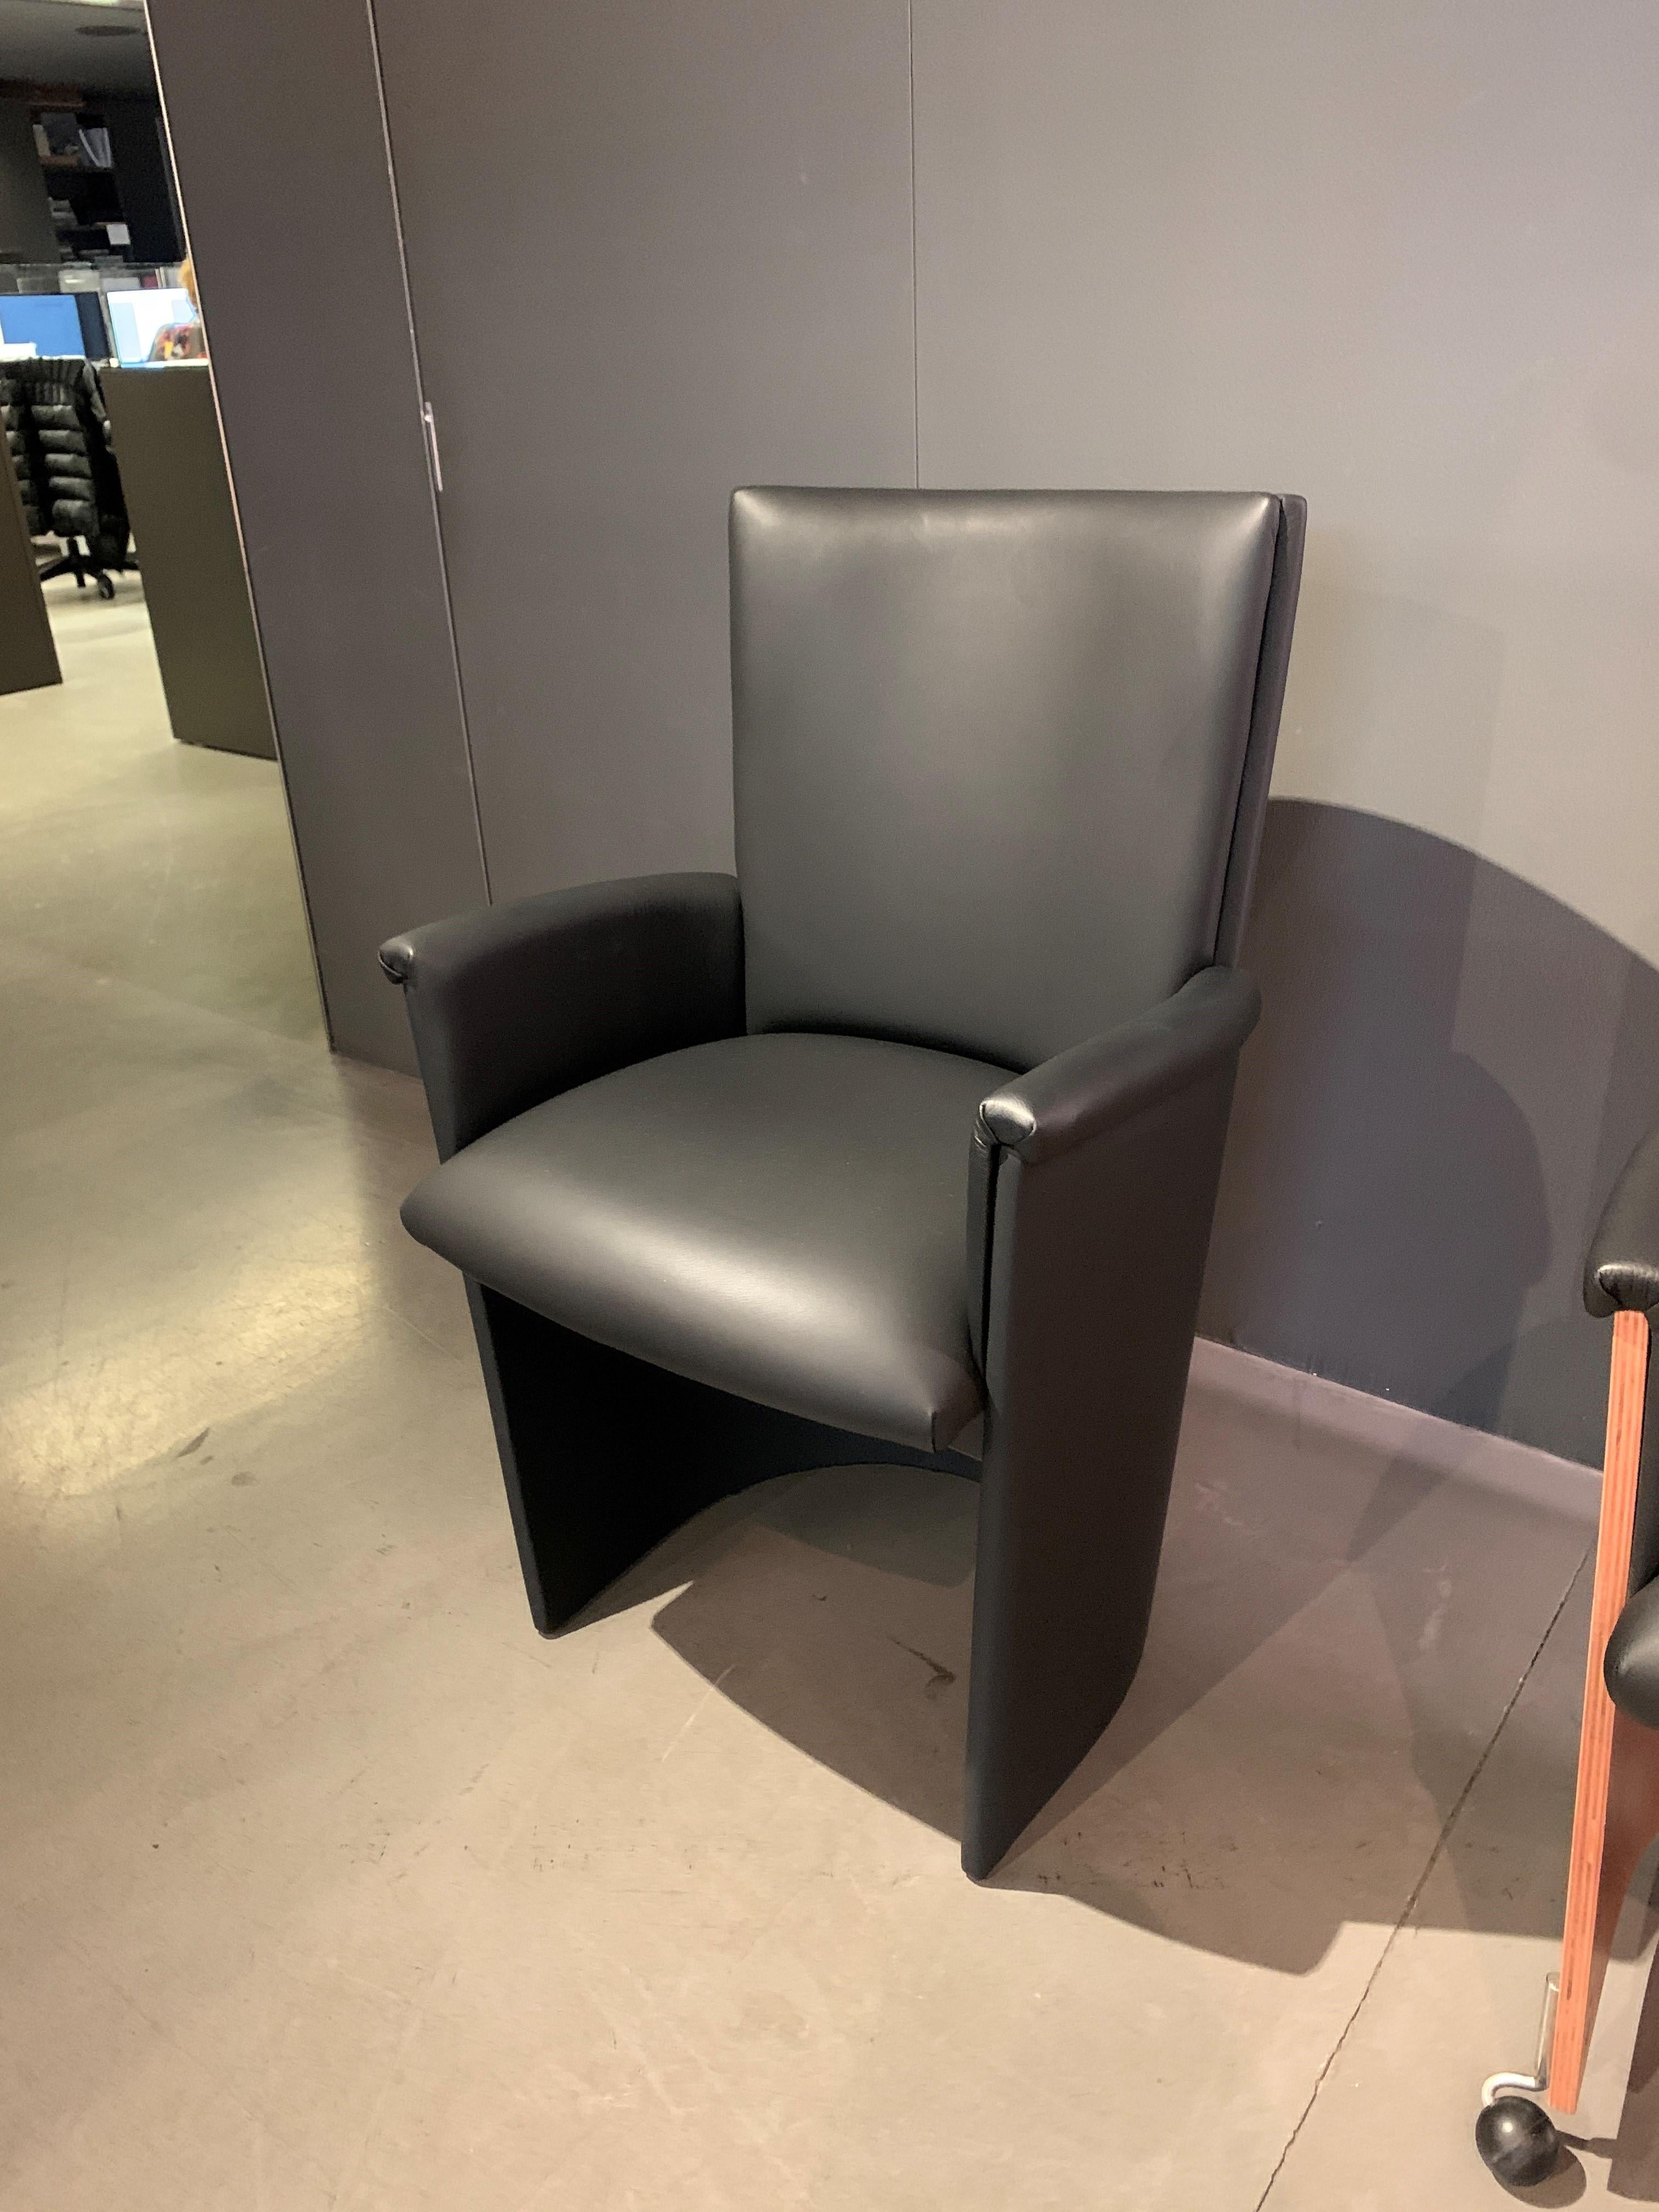 A Black Leather armchair Designed by Massimo and Lella Vignelli for Bernini.  Both seat and backrest are covered in Black Leather. 